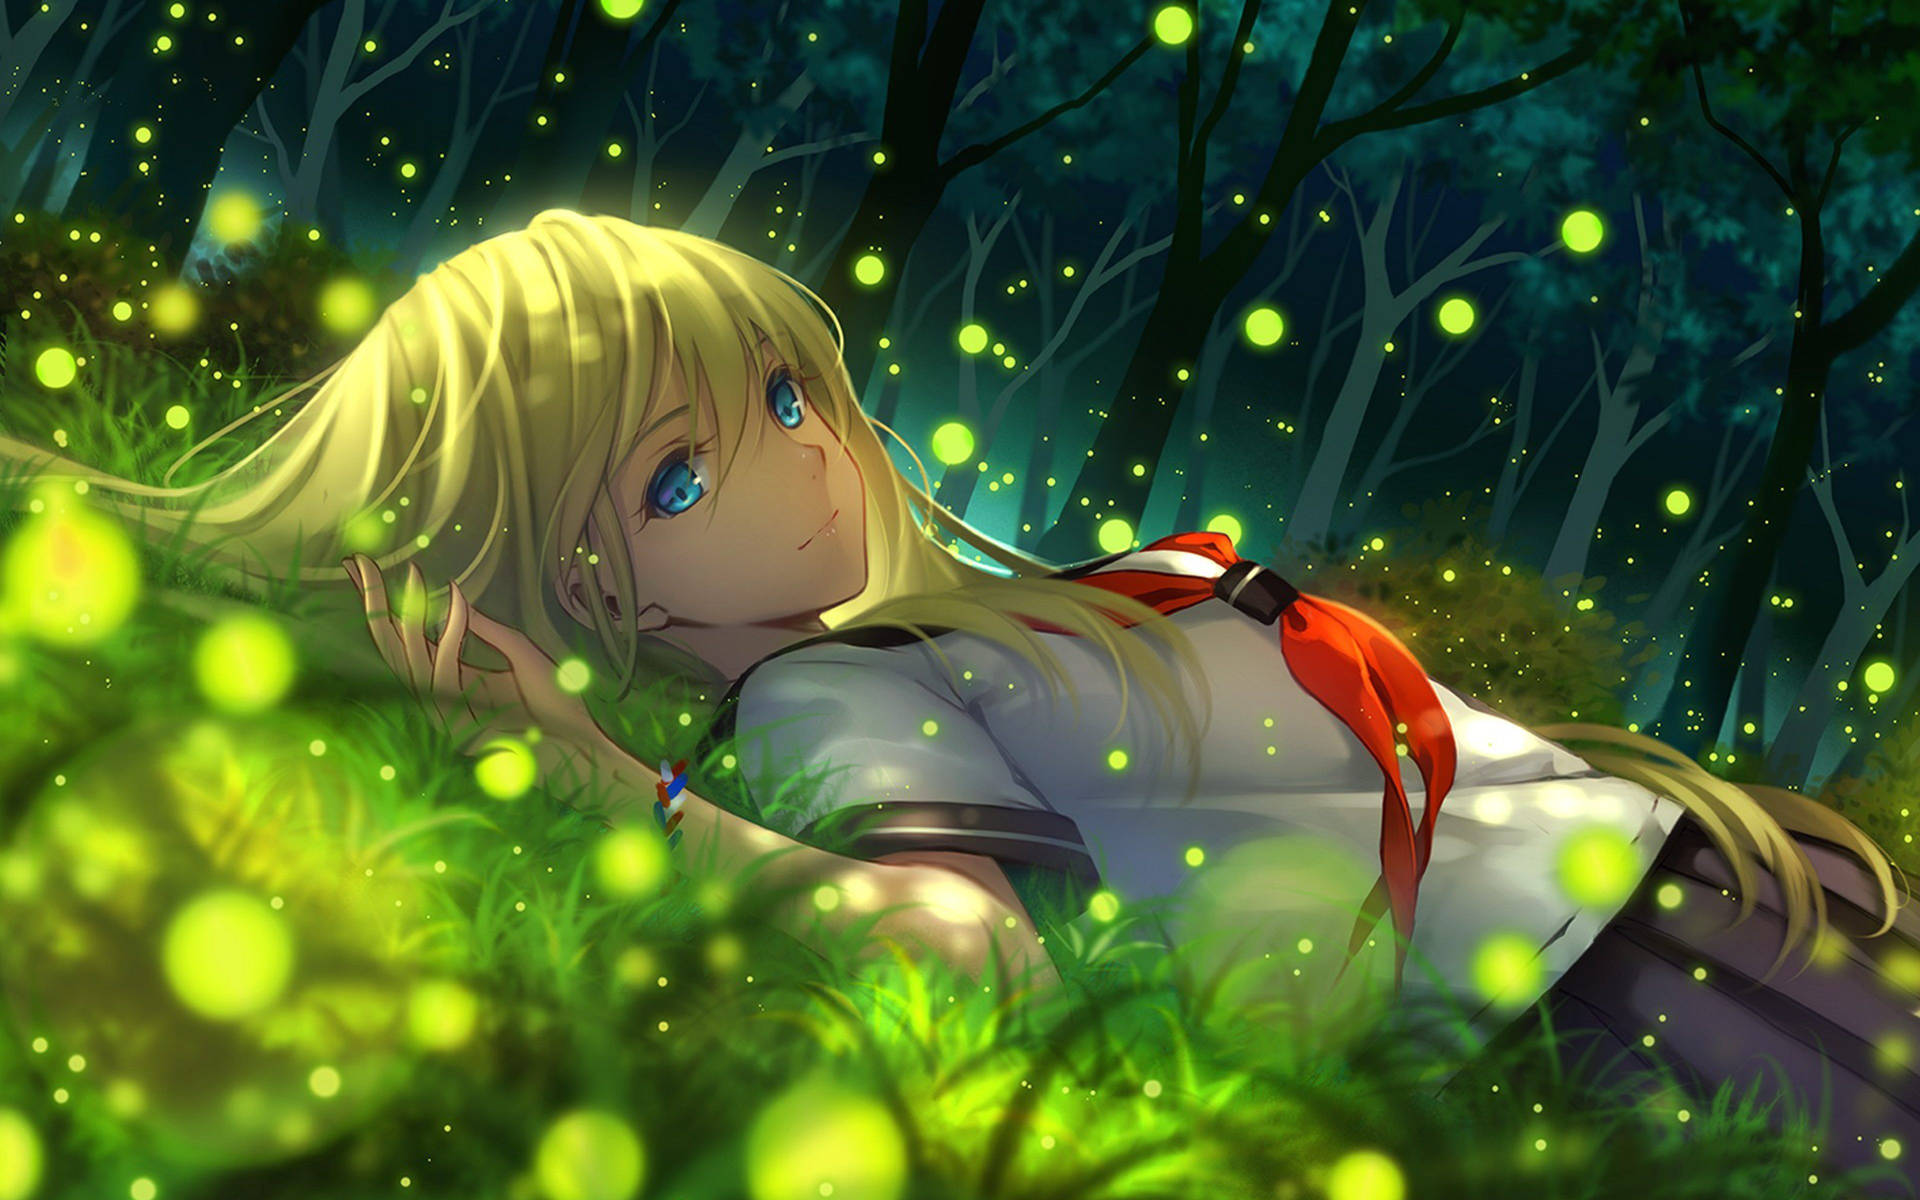 Anime girl laying on the grass with glowing circles rising up wallpaper